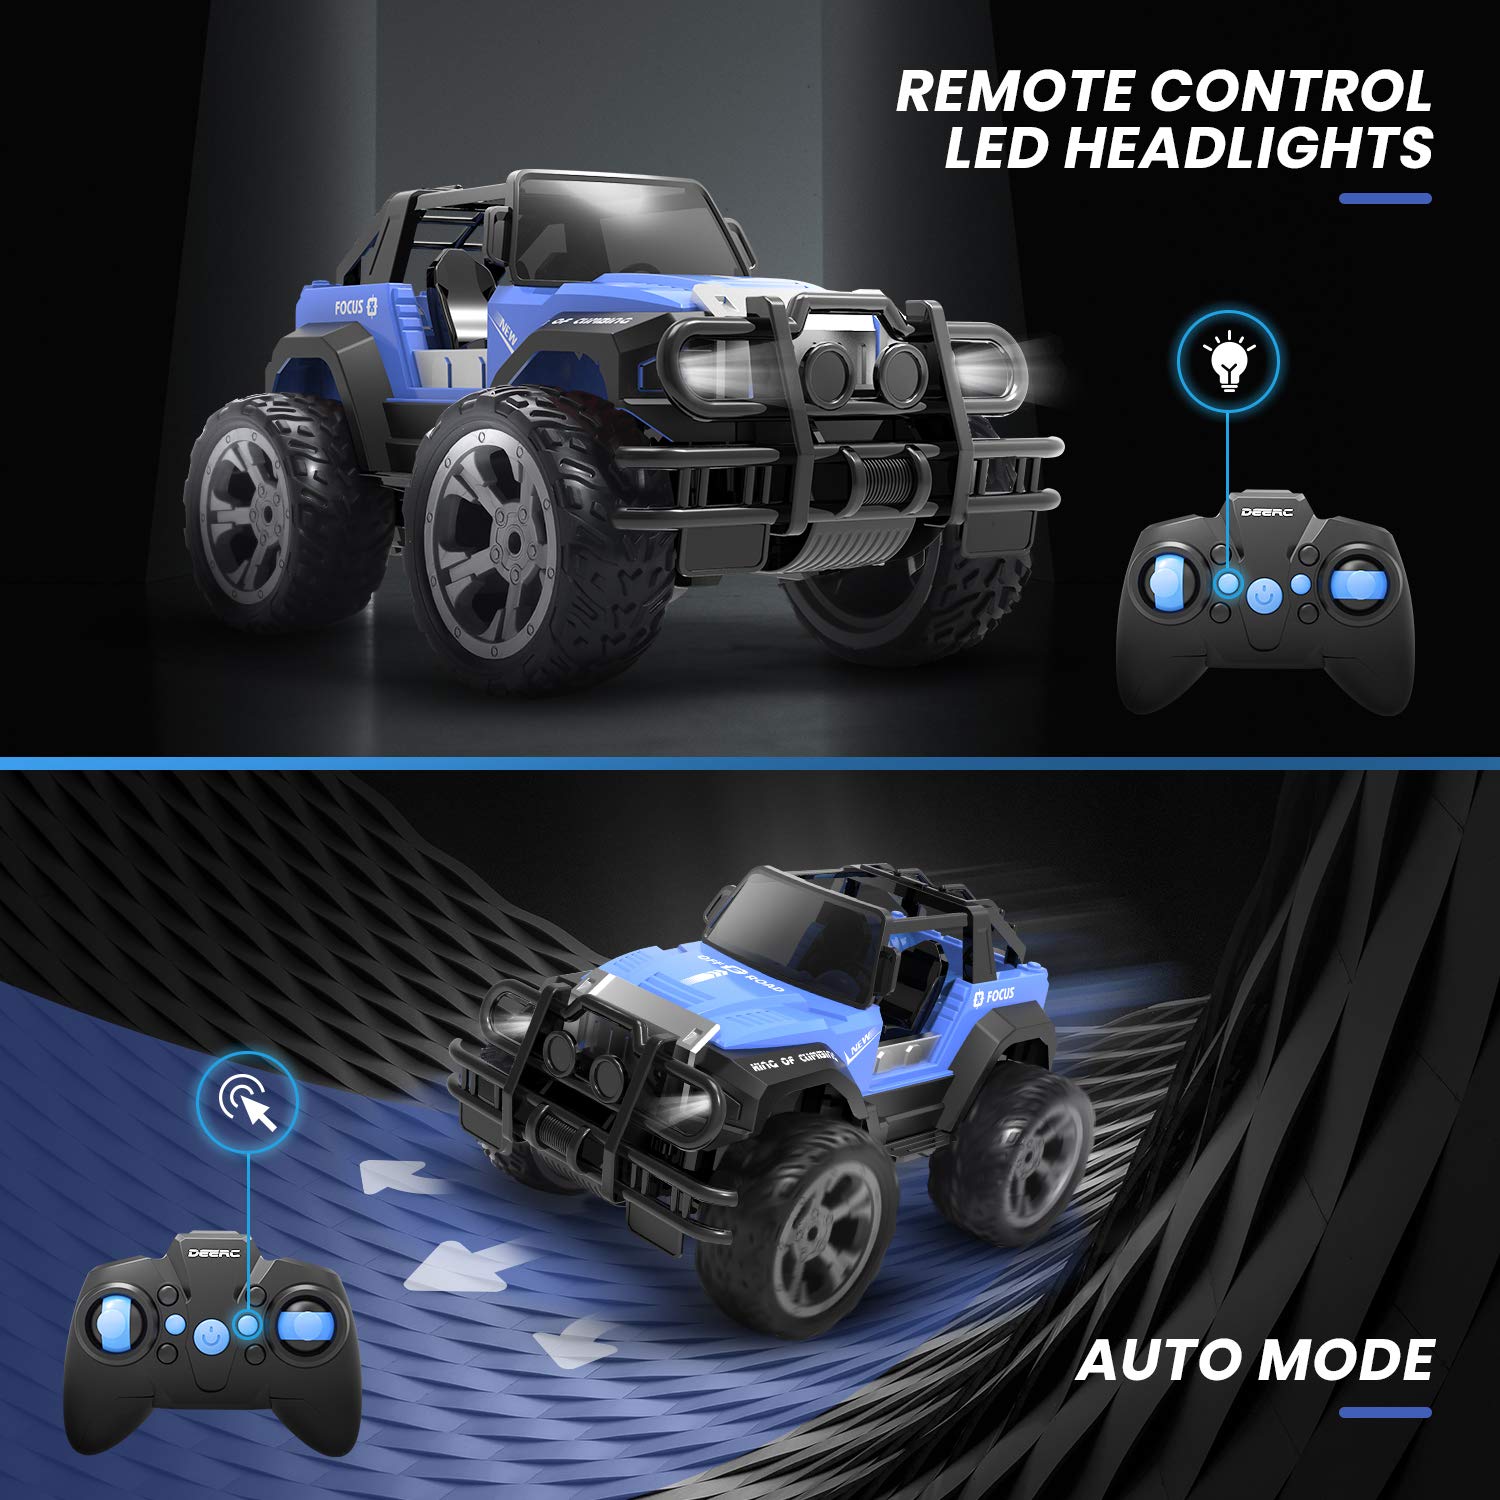 DEERC DE42 Remote Control Car RC Racing Cars,1:18 Scale 80 Min Play 2.4Ghz LED Light Auto Mode Off Road RC Trucks with Storage Case,All Terrain SUV Jeep Cars Toys Gifts for Boys Kids Girls Teens,Blue